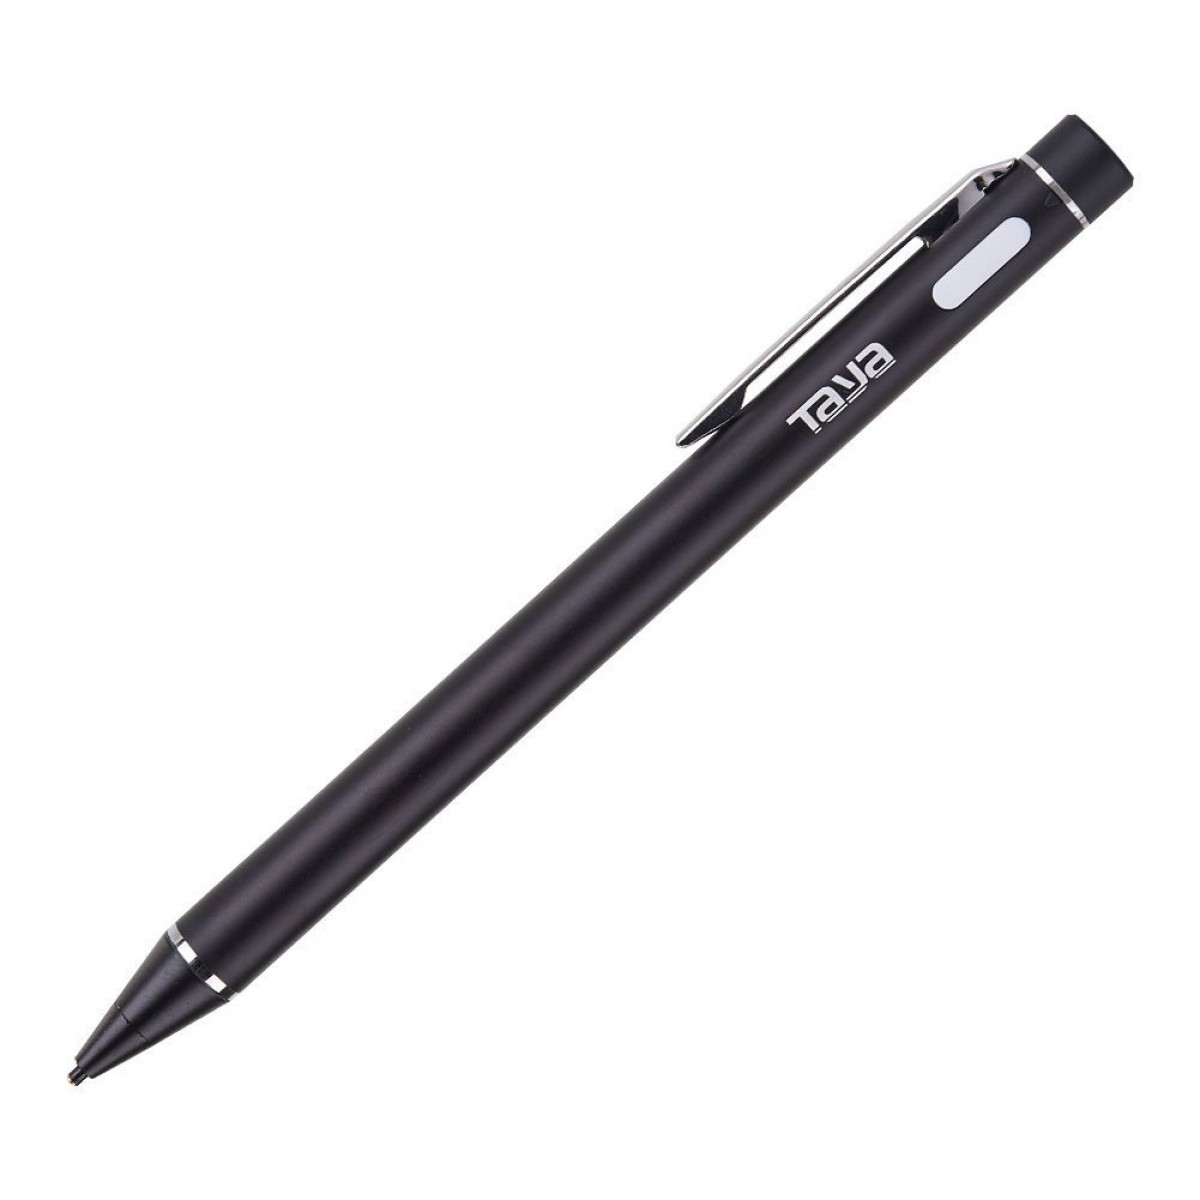 Awinner Active Touch Stylus Pen Fine Point Precision For Touchscreens New 